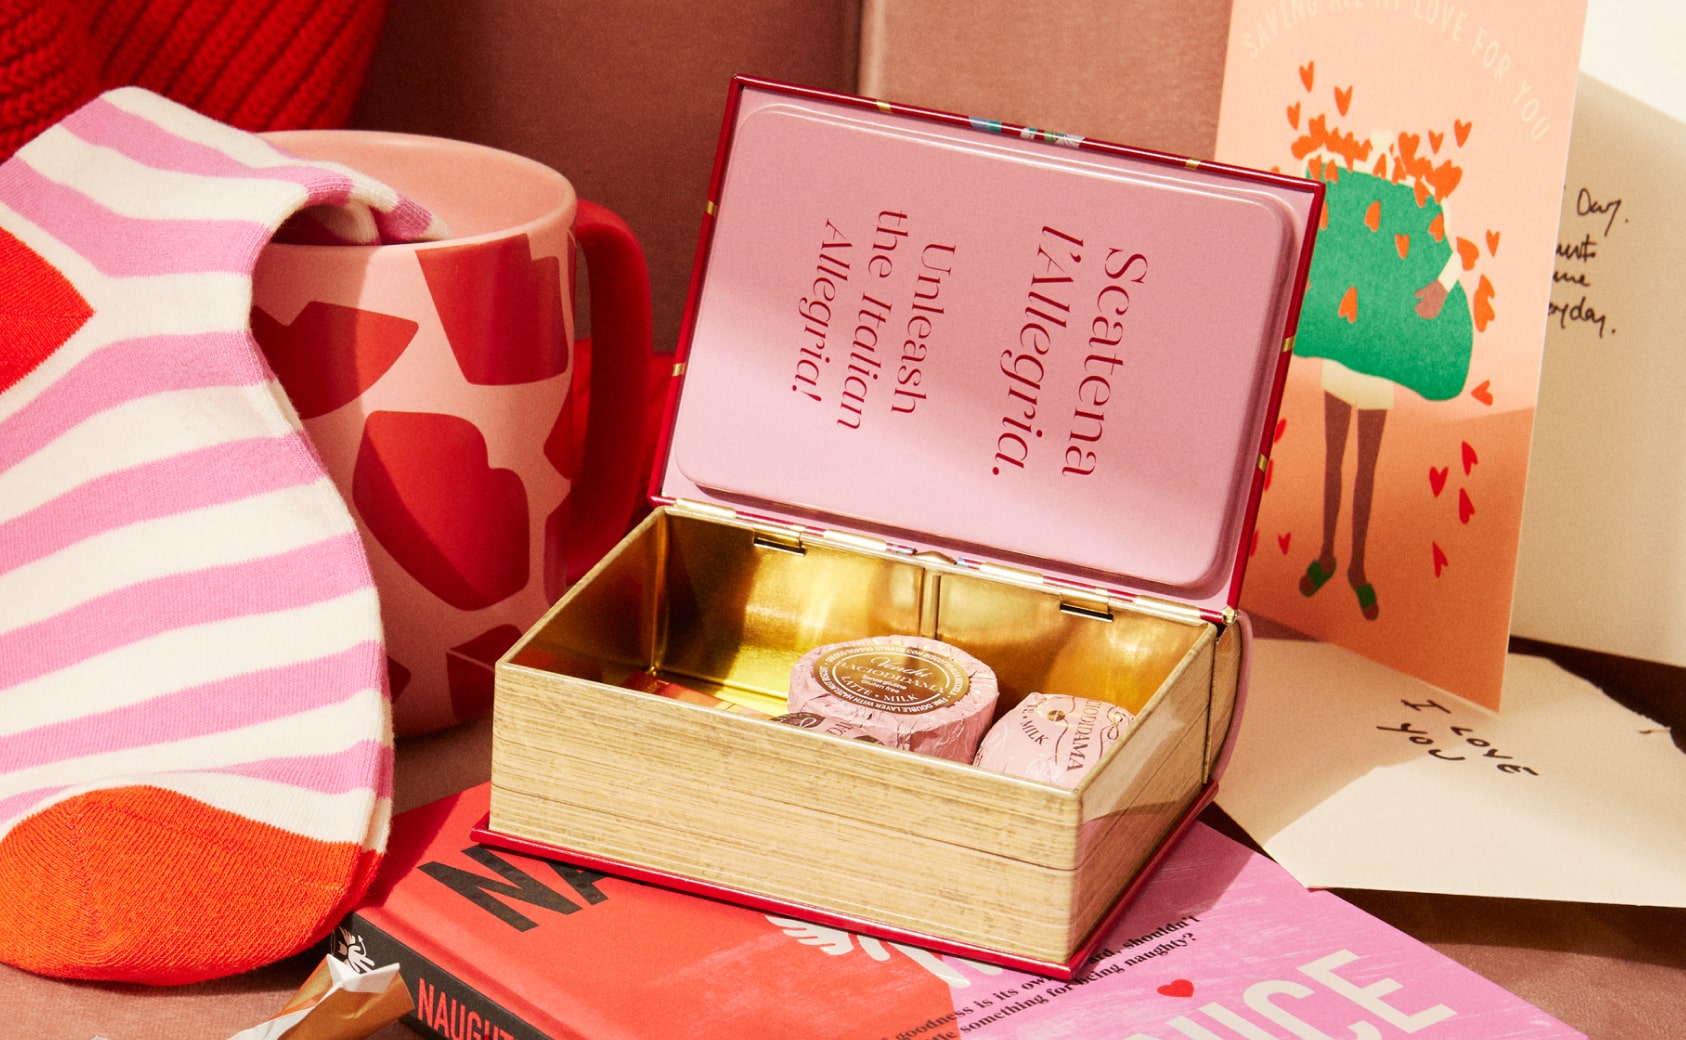 A selection of Valentine's Day Gifts, including a mug, socks and chocolates.